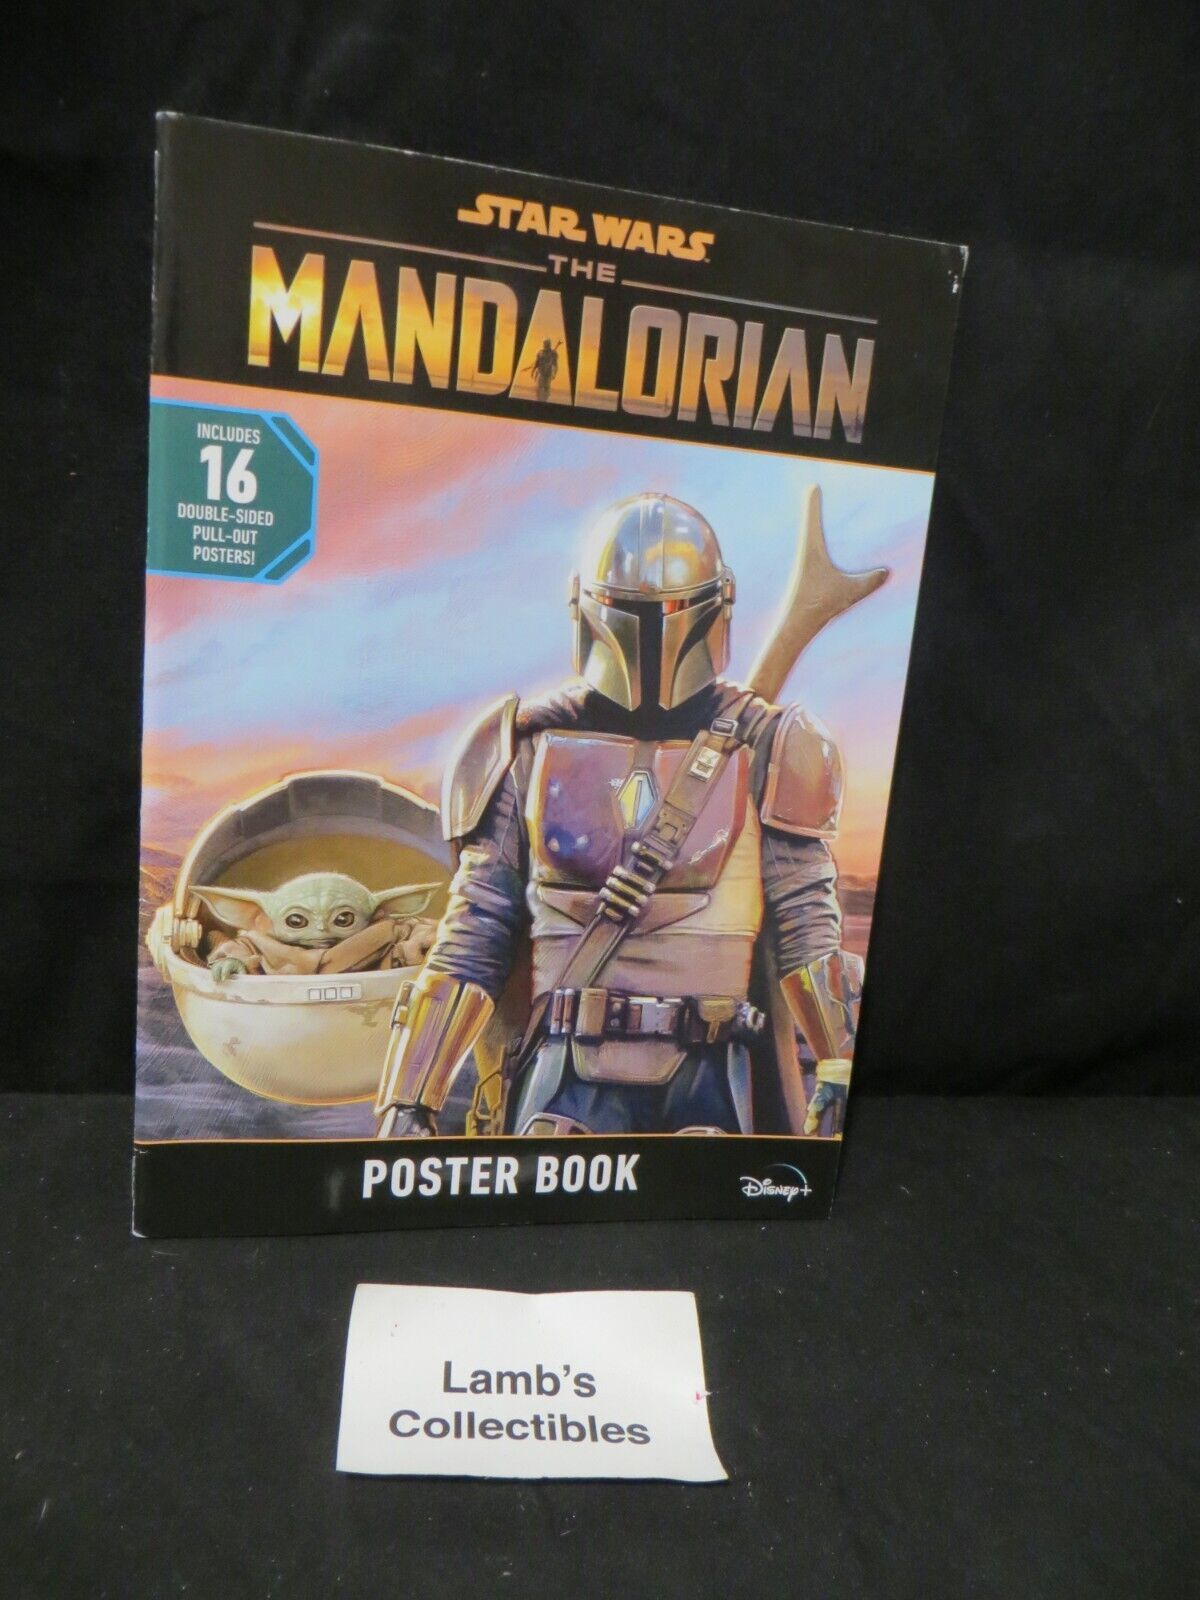 Primary image for Star Wars The Mandalorian poster book Disney+ LucasFilms Press 2019 Baby Grogu